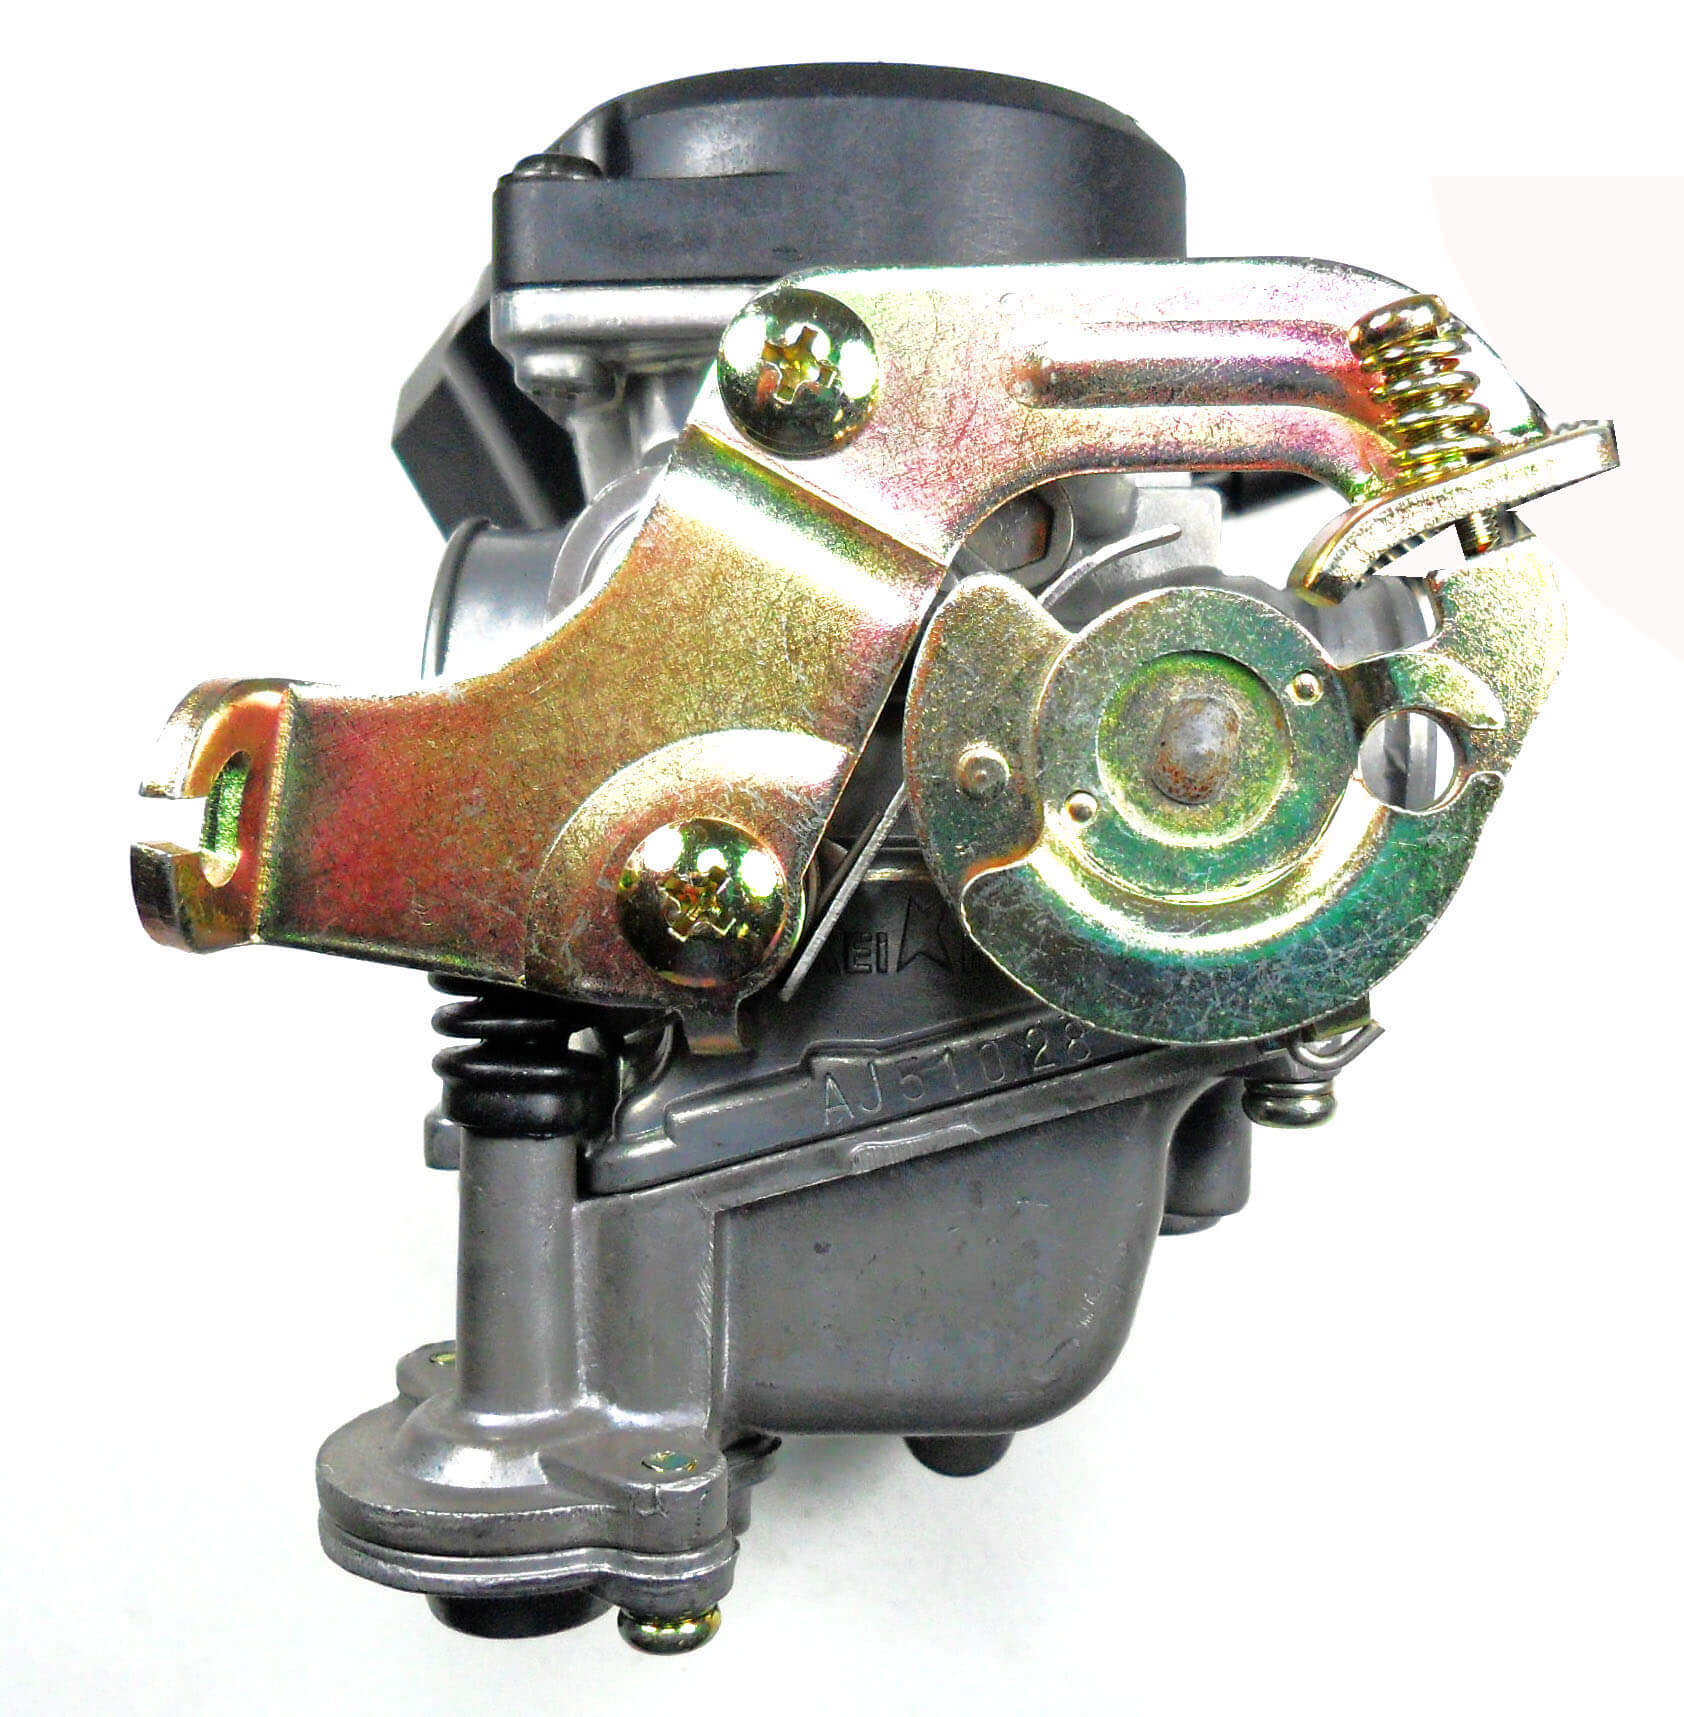 Keihin Style PD18J Carburetor with booster pump TOP QUALITY - Best Value Intake ID=18 OD=28 Air Box OD=38mm Fits Most 49-90cc Scooters With GY6 Belt Drive Motors - Click Image to Close